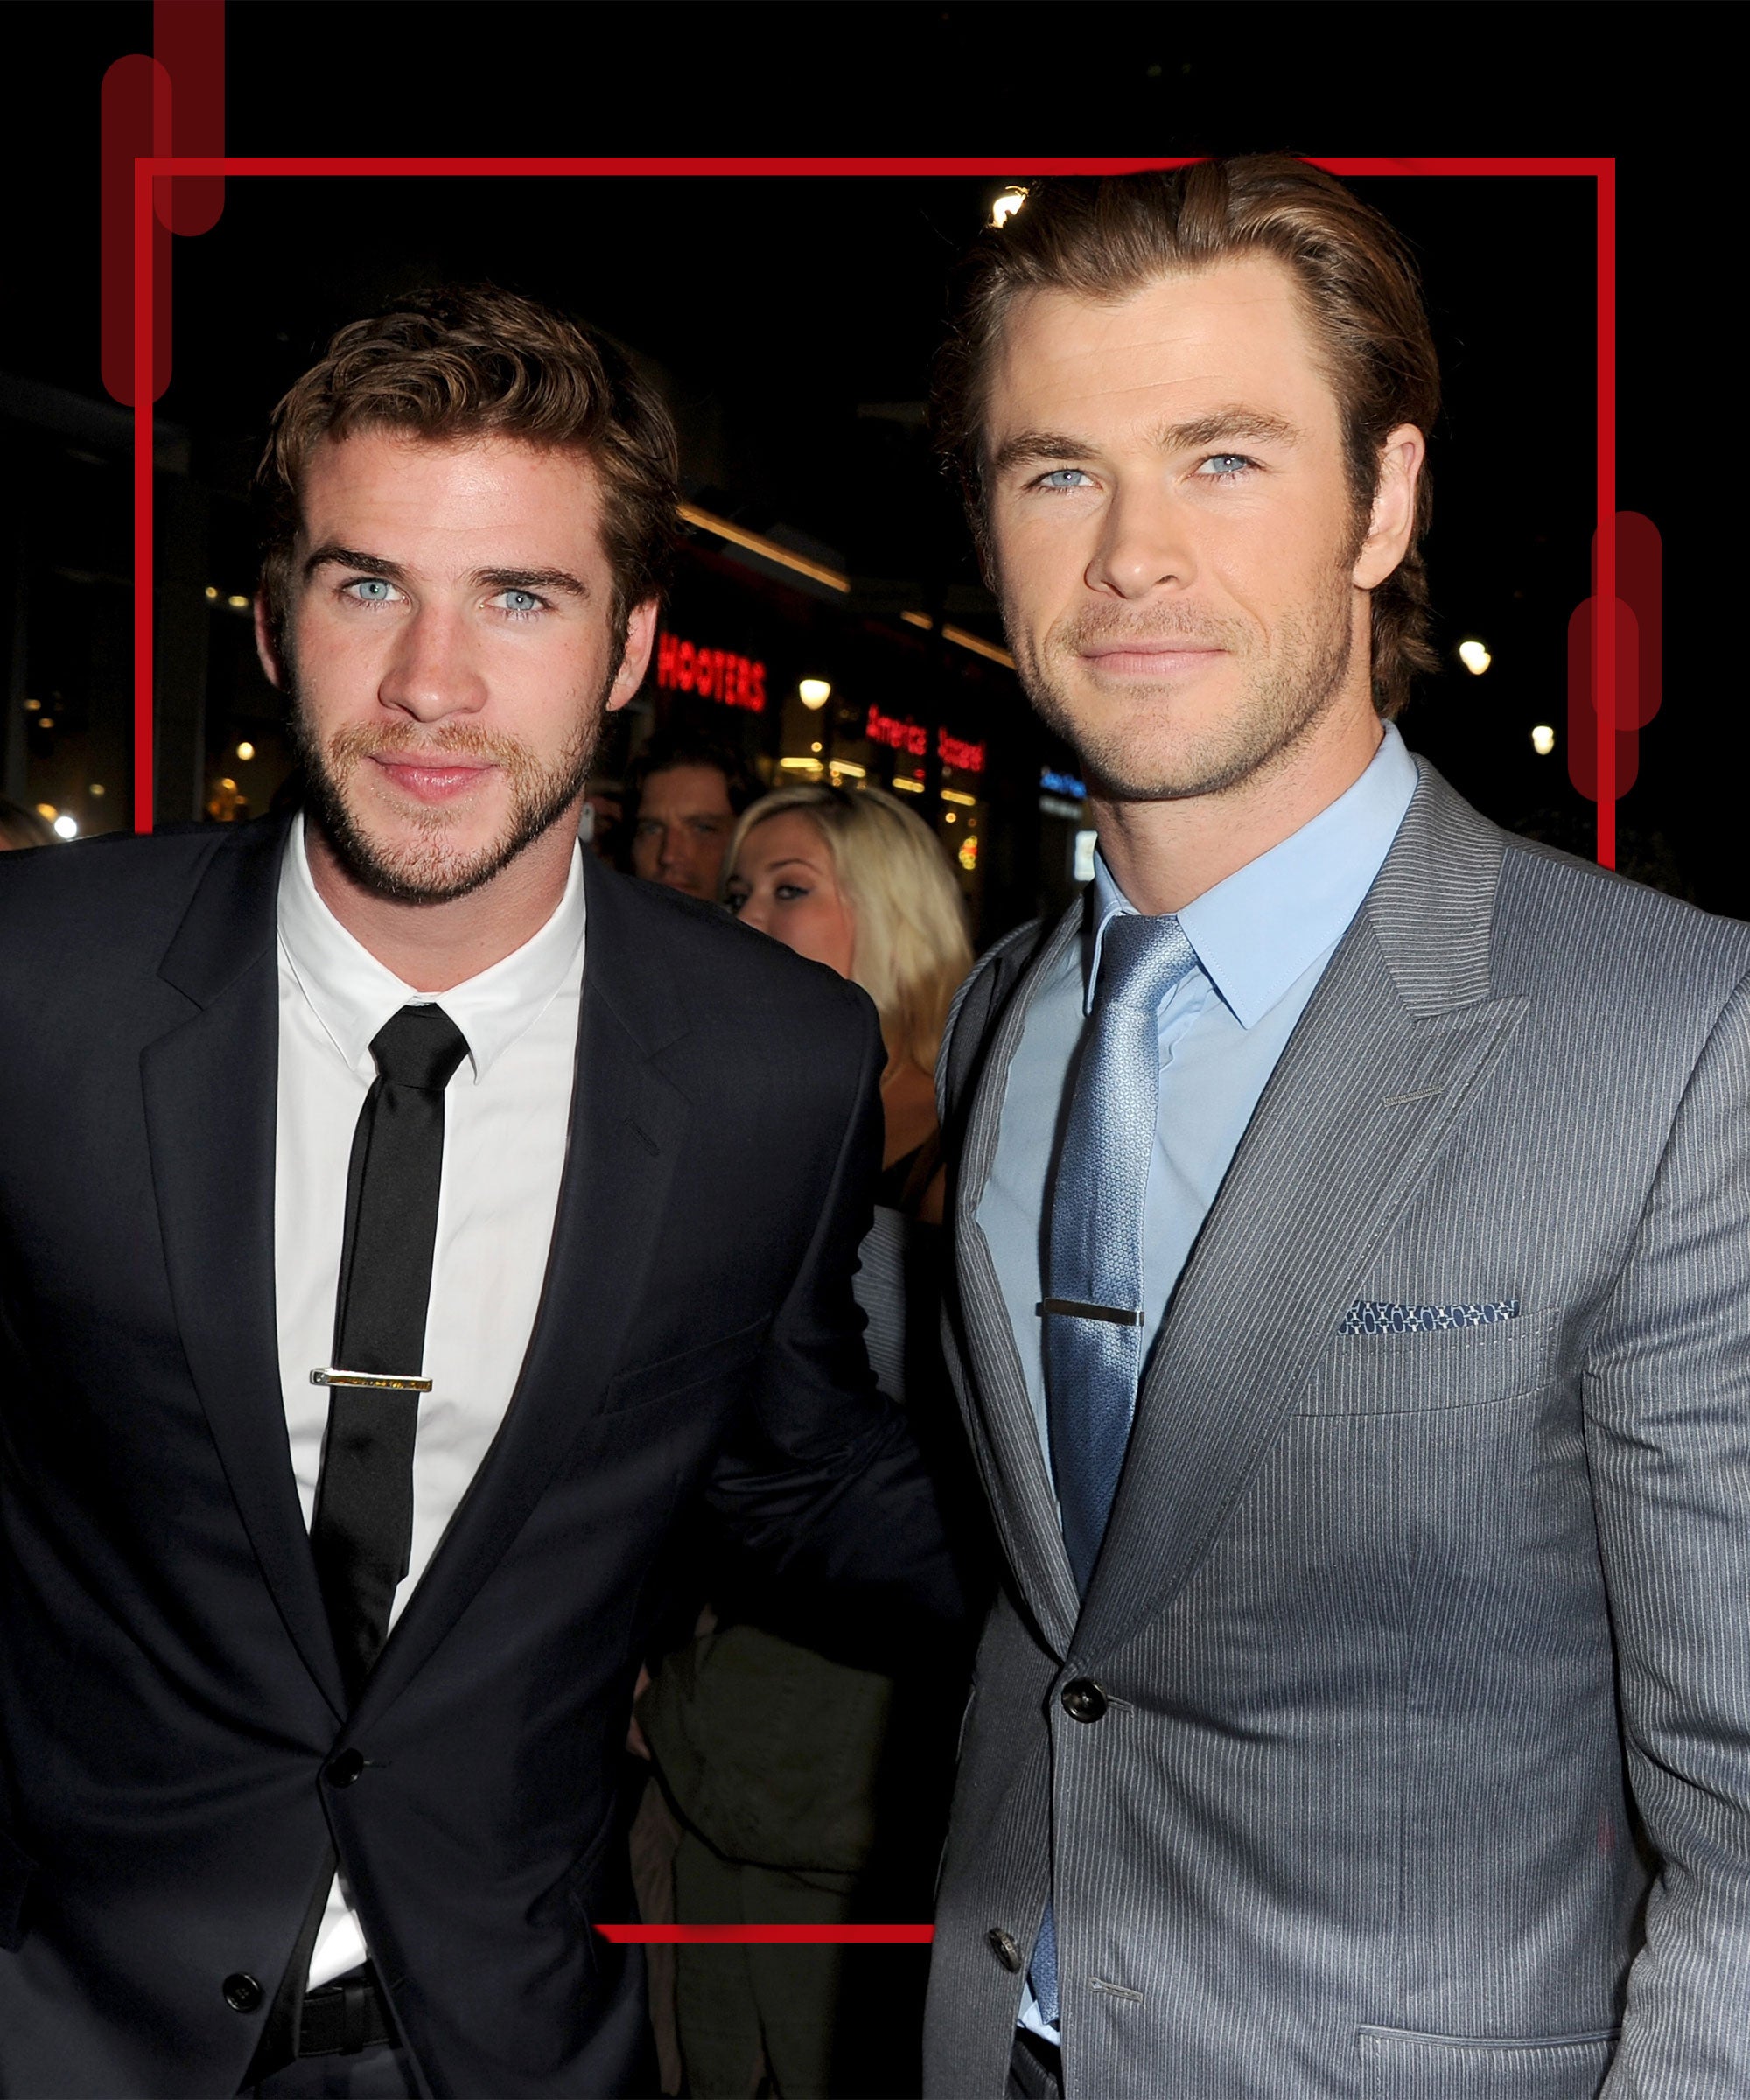 Chris Evans And Scott Evans Vs Chris Hemsworth And Liam Hemsworth: Which Is The Hottest Sibling Duo In Hollywood?